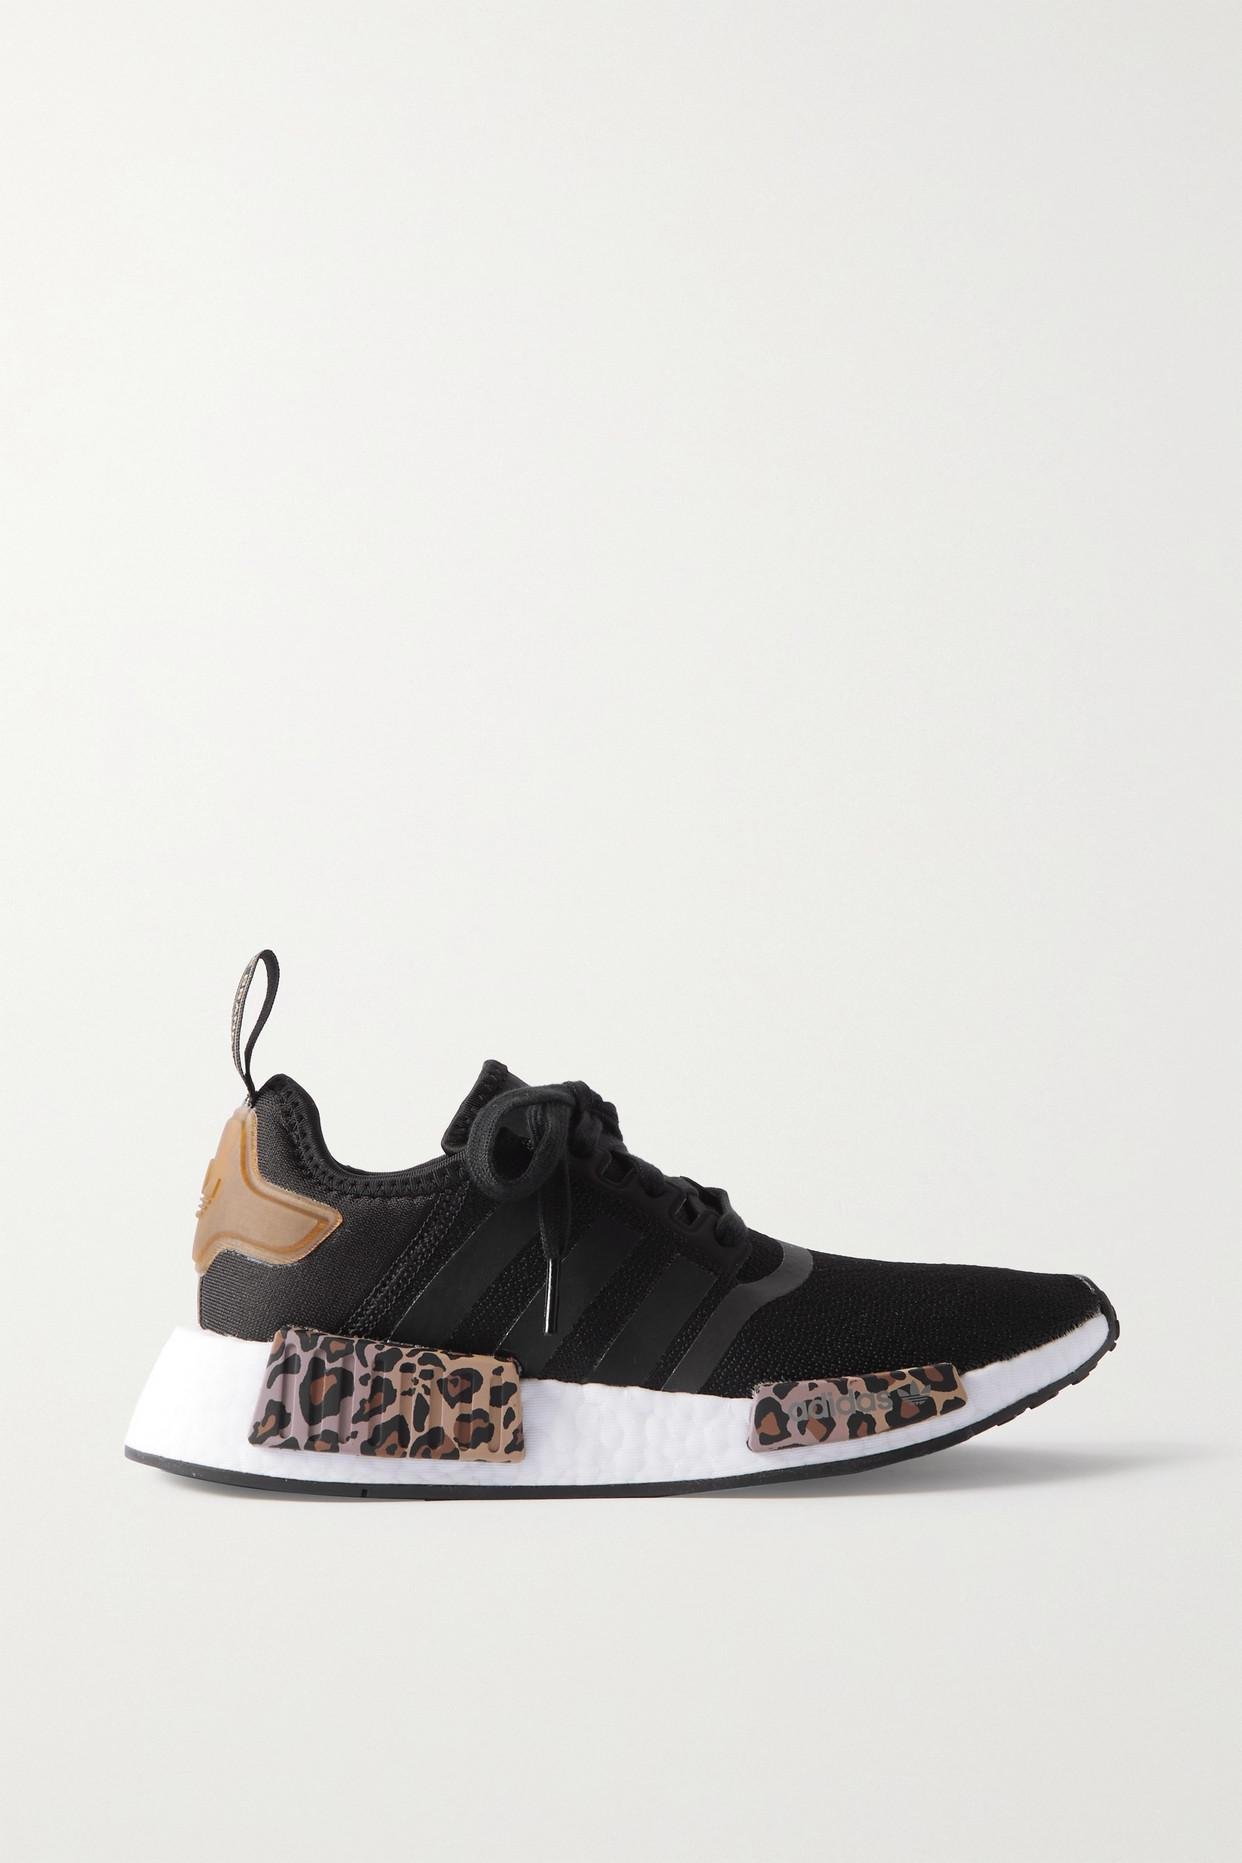 Originals Nmd R1 Leopard-print Rubber-trimmed Sneakers in White Lyst Canada